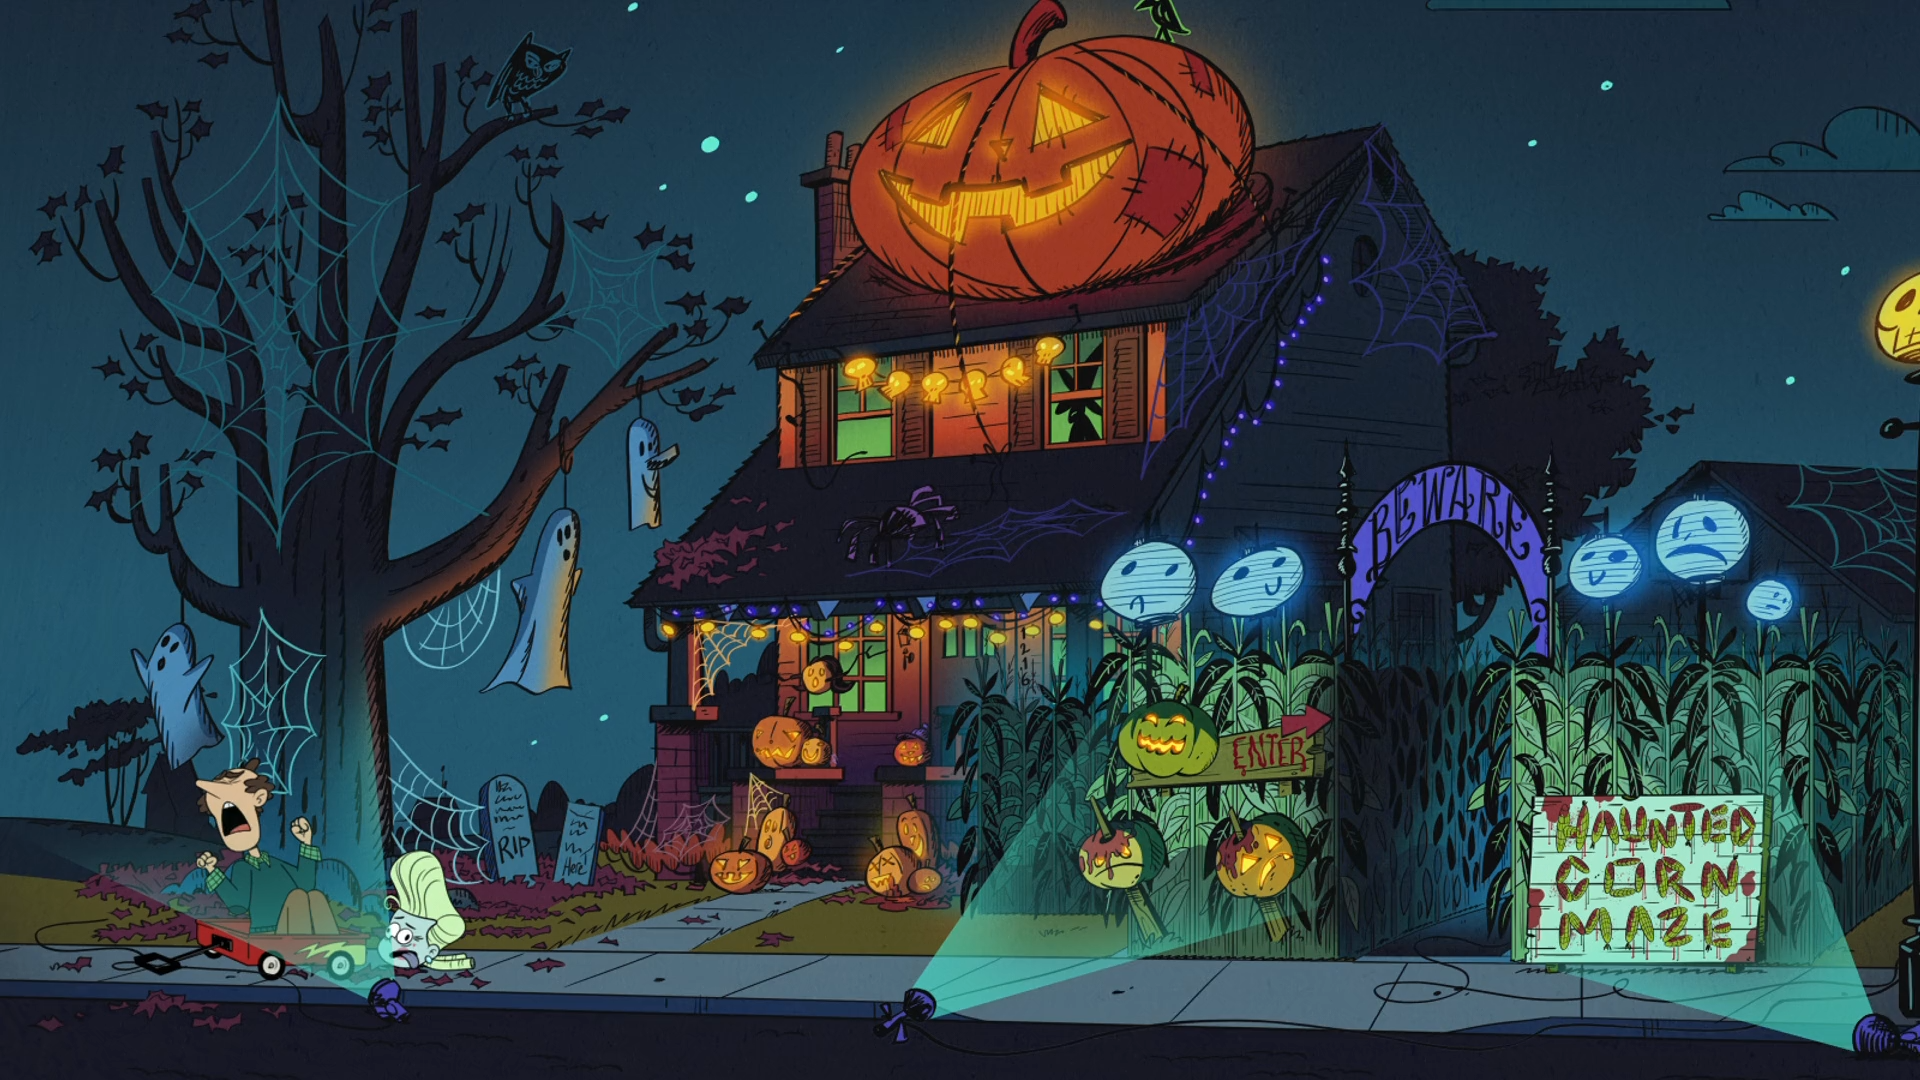 The Loud House "Tricked" Halloween Special.